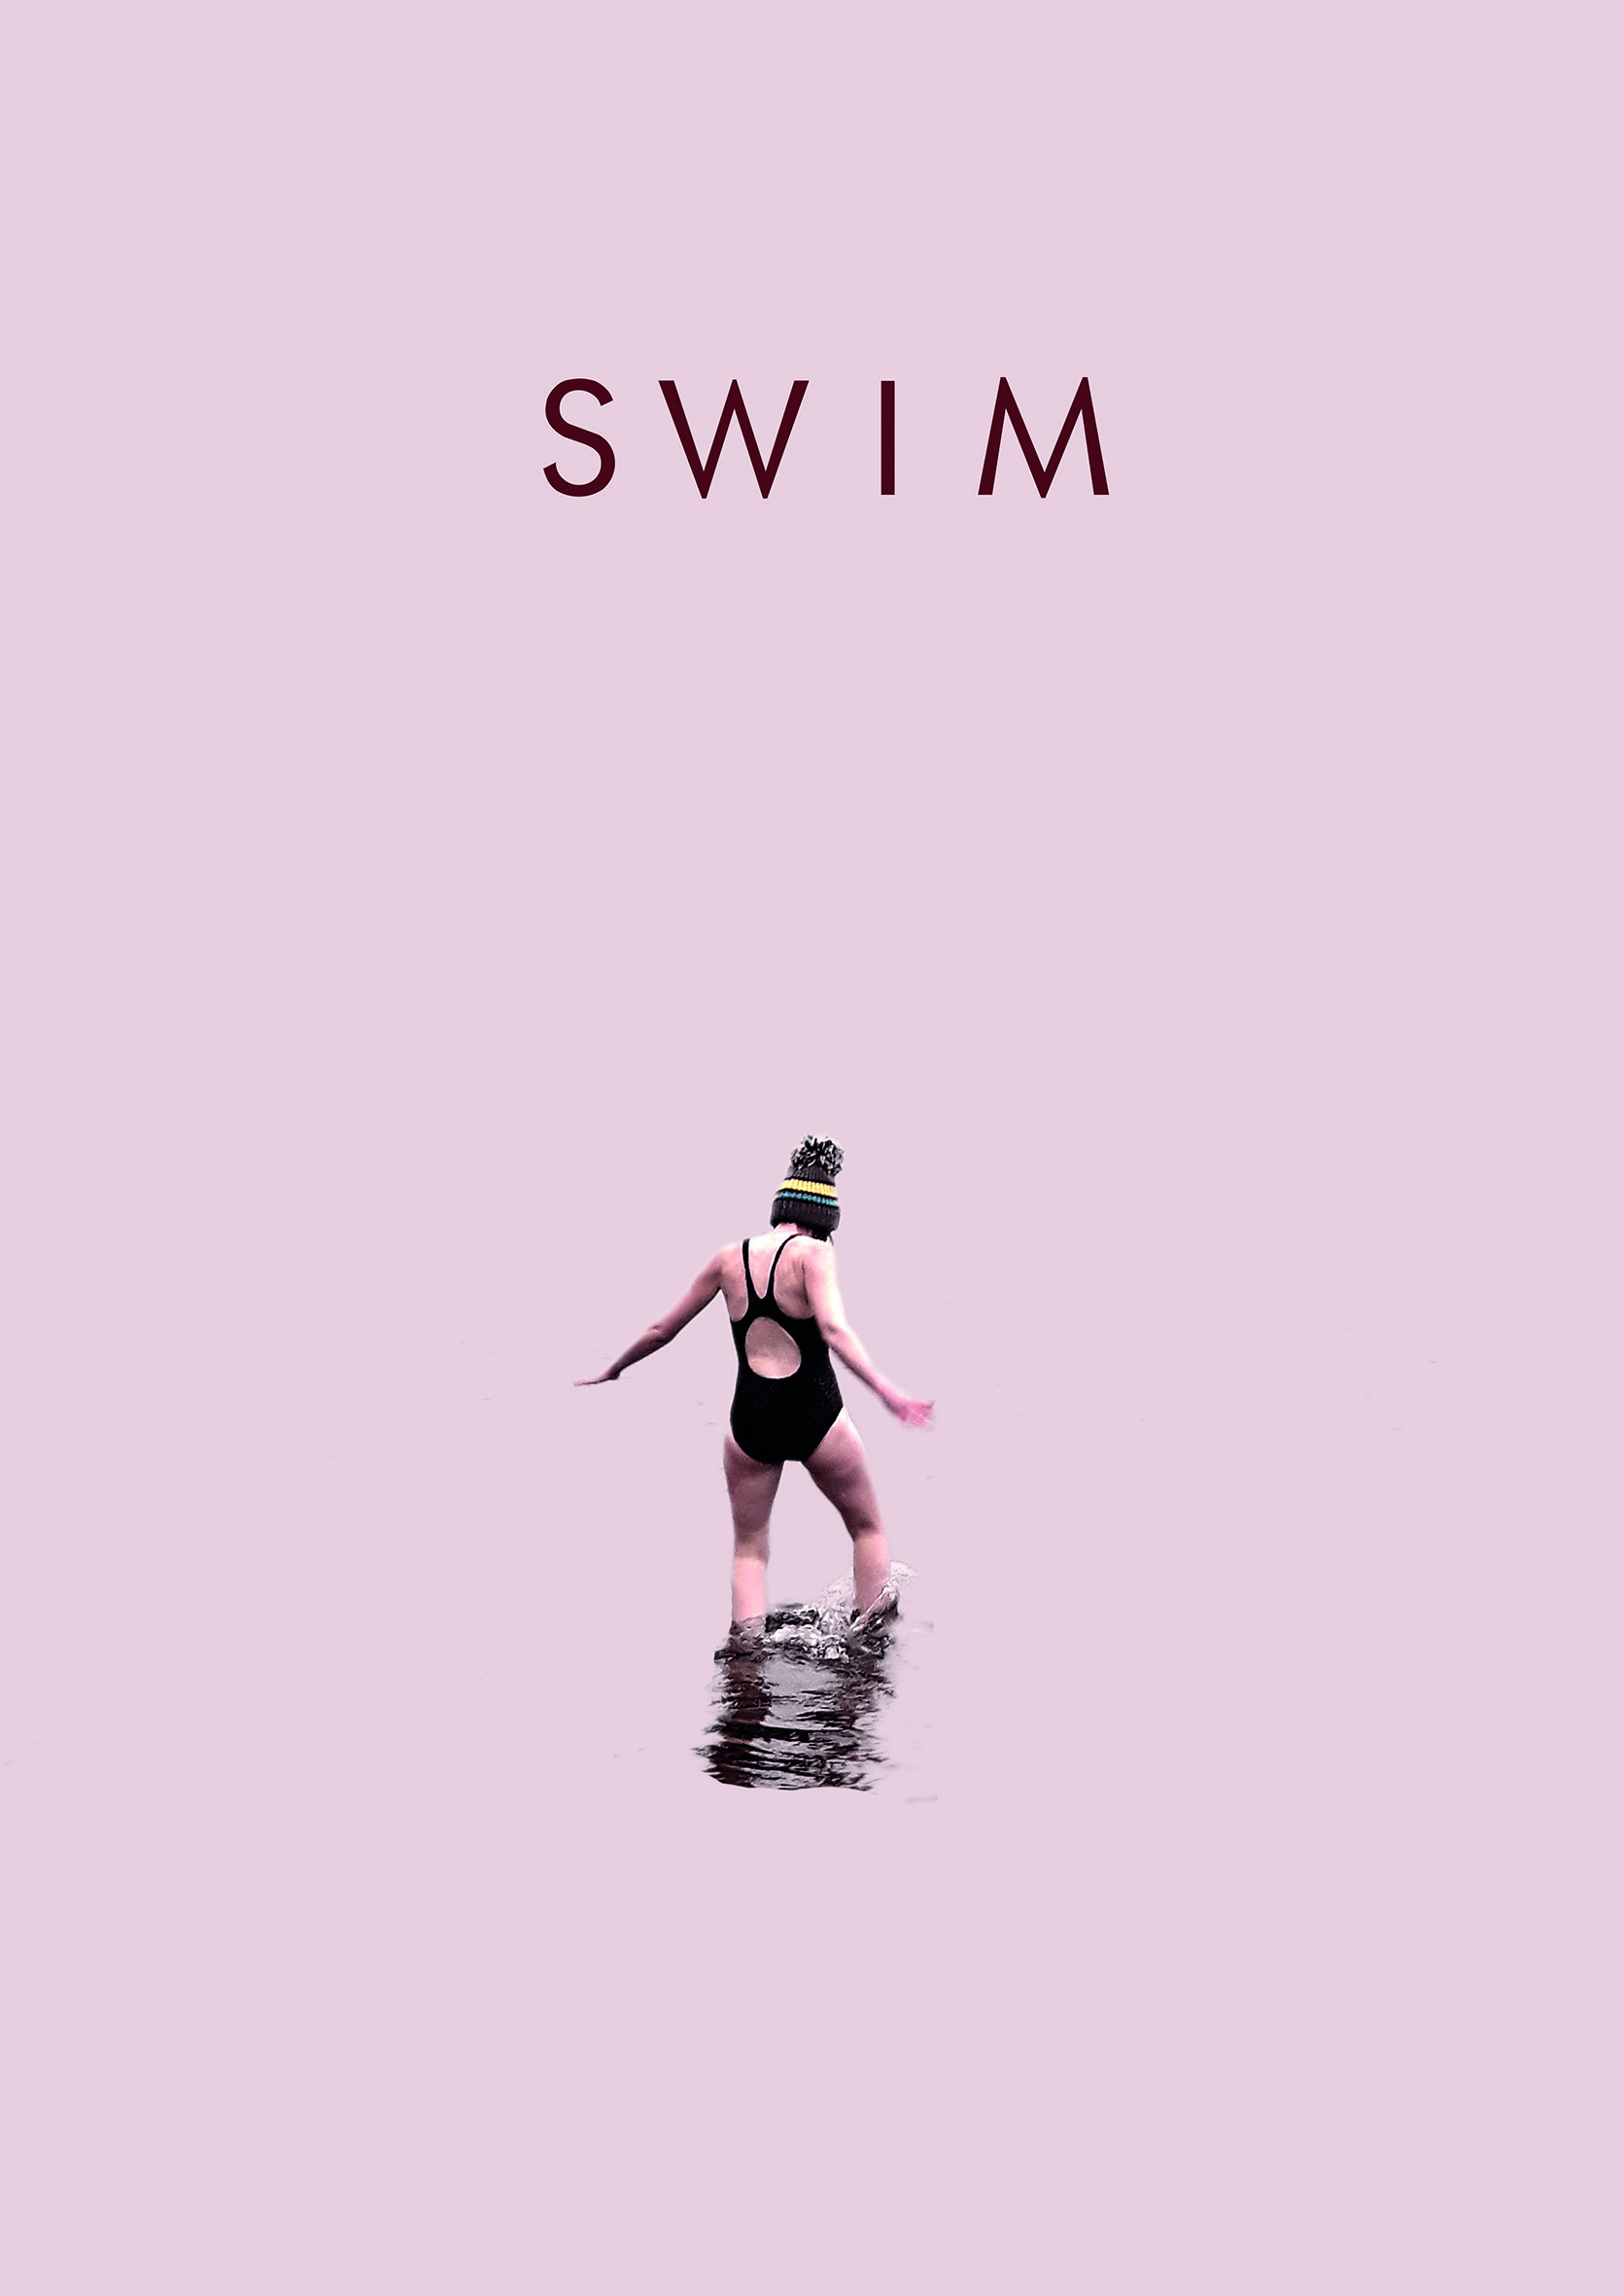 Swim Poster Text And Image